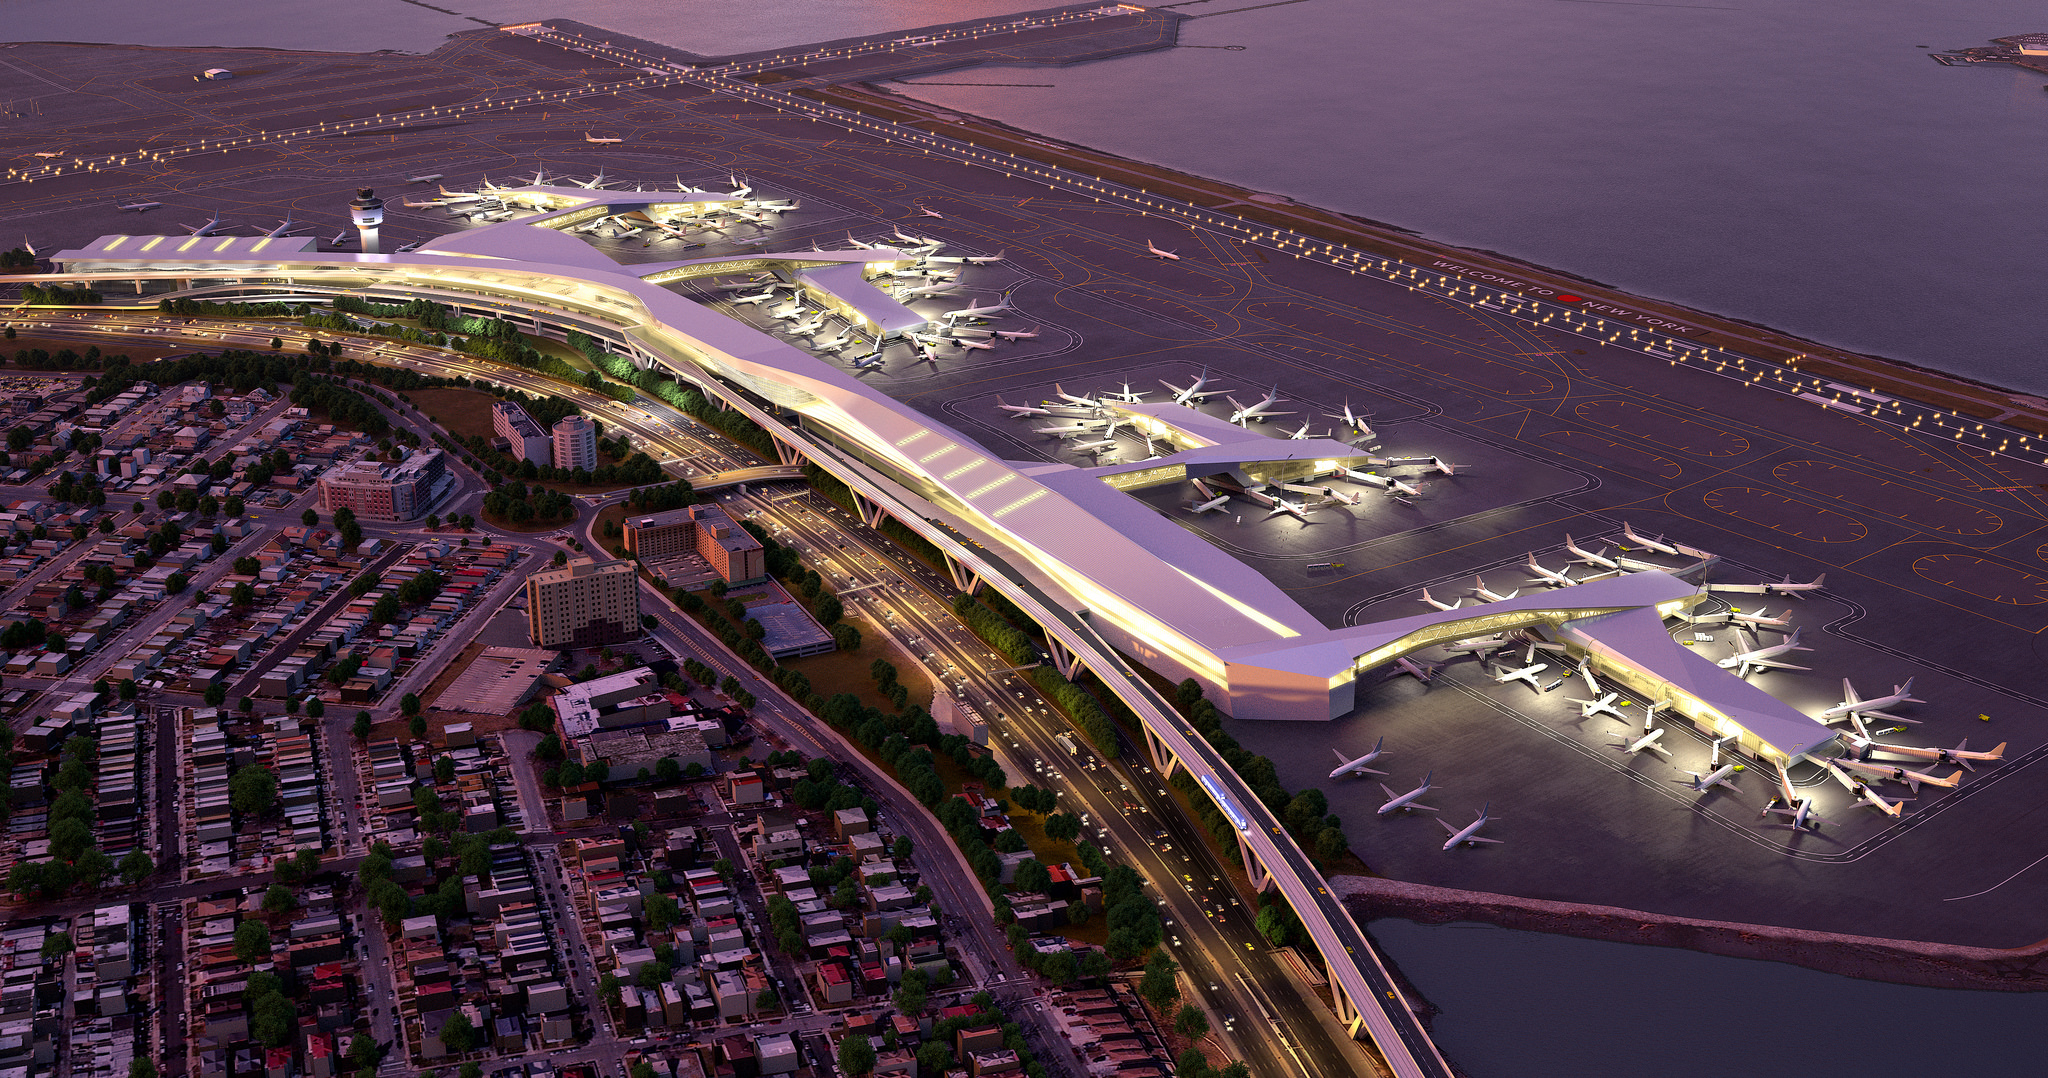 LaGuardia Airport, Terminals C and D Redevelopment
-Queens, NY